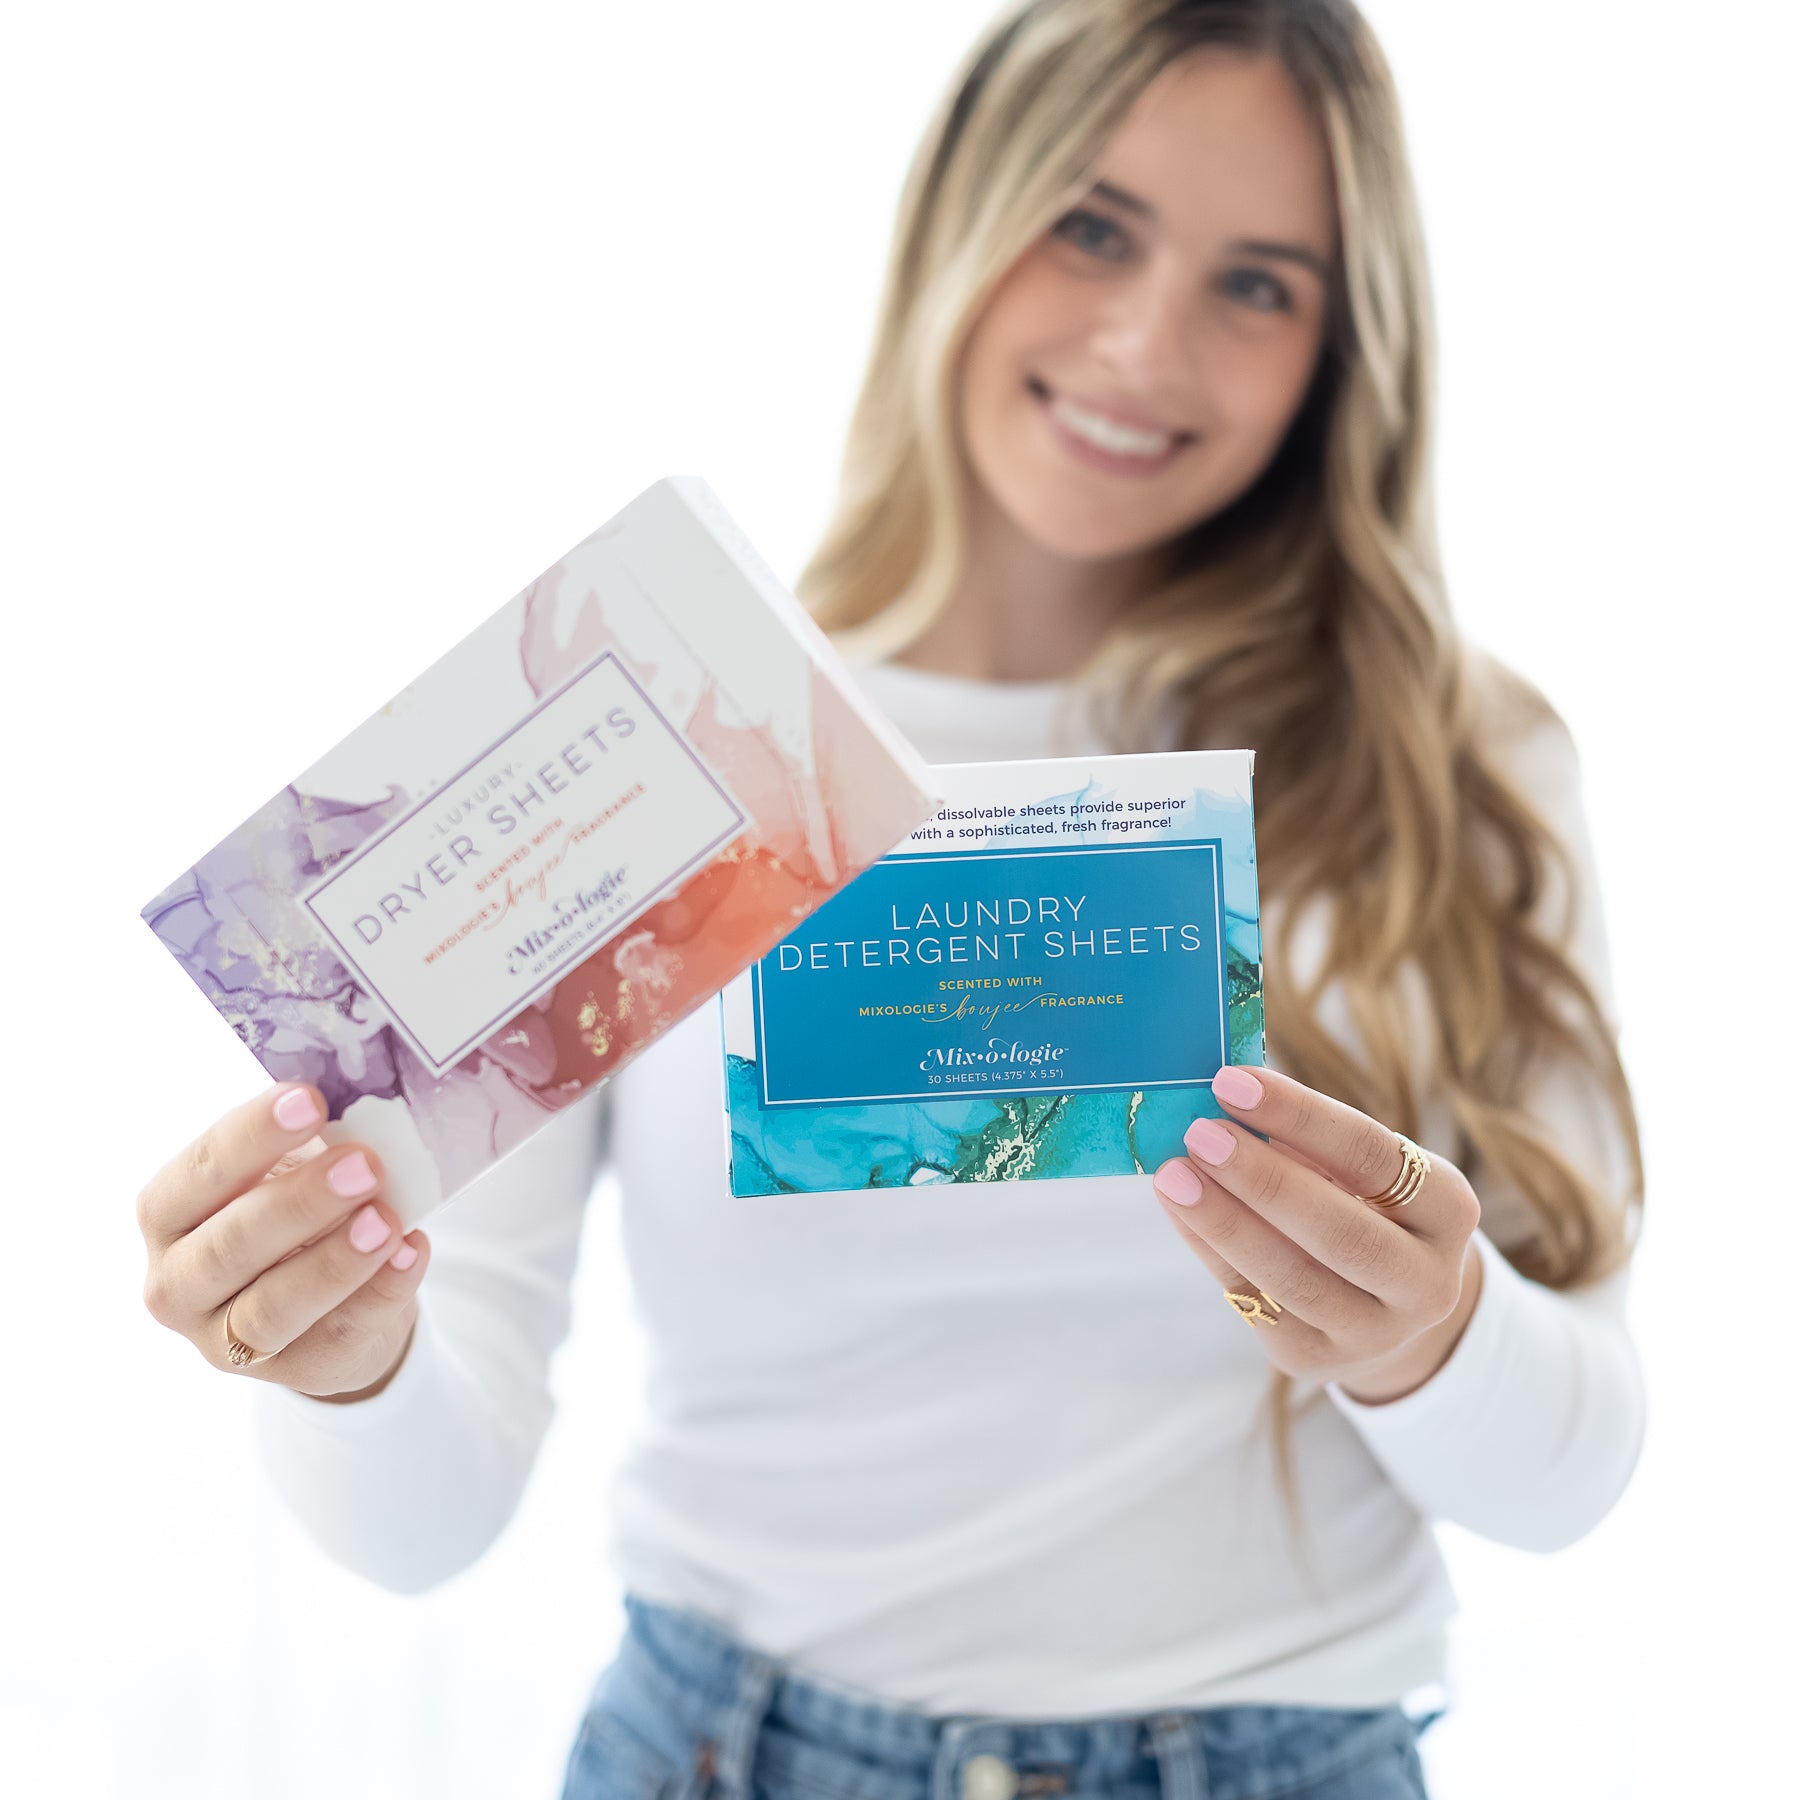 Luxury dryer sheets scented with Mixologie's Boujee fragrance. 40 of the 6.4"X9" sized sheets in rectangle box. Being held by model with detergent sheets.